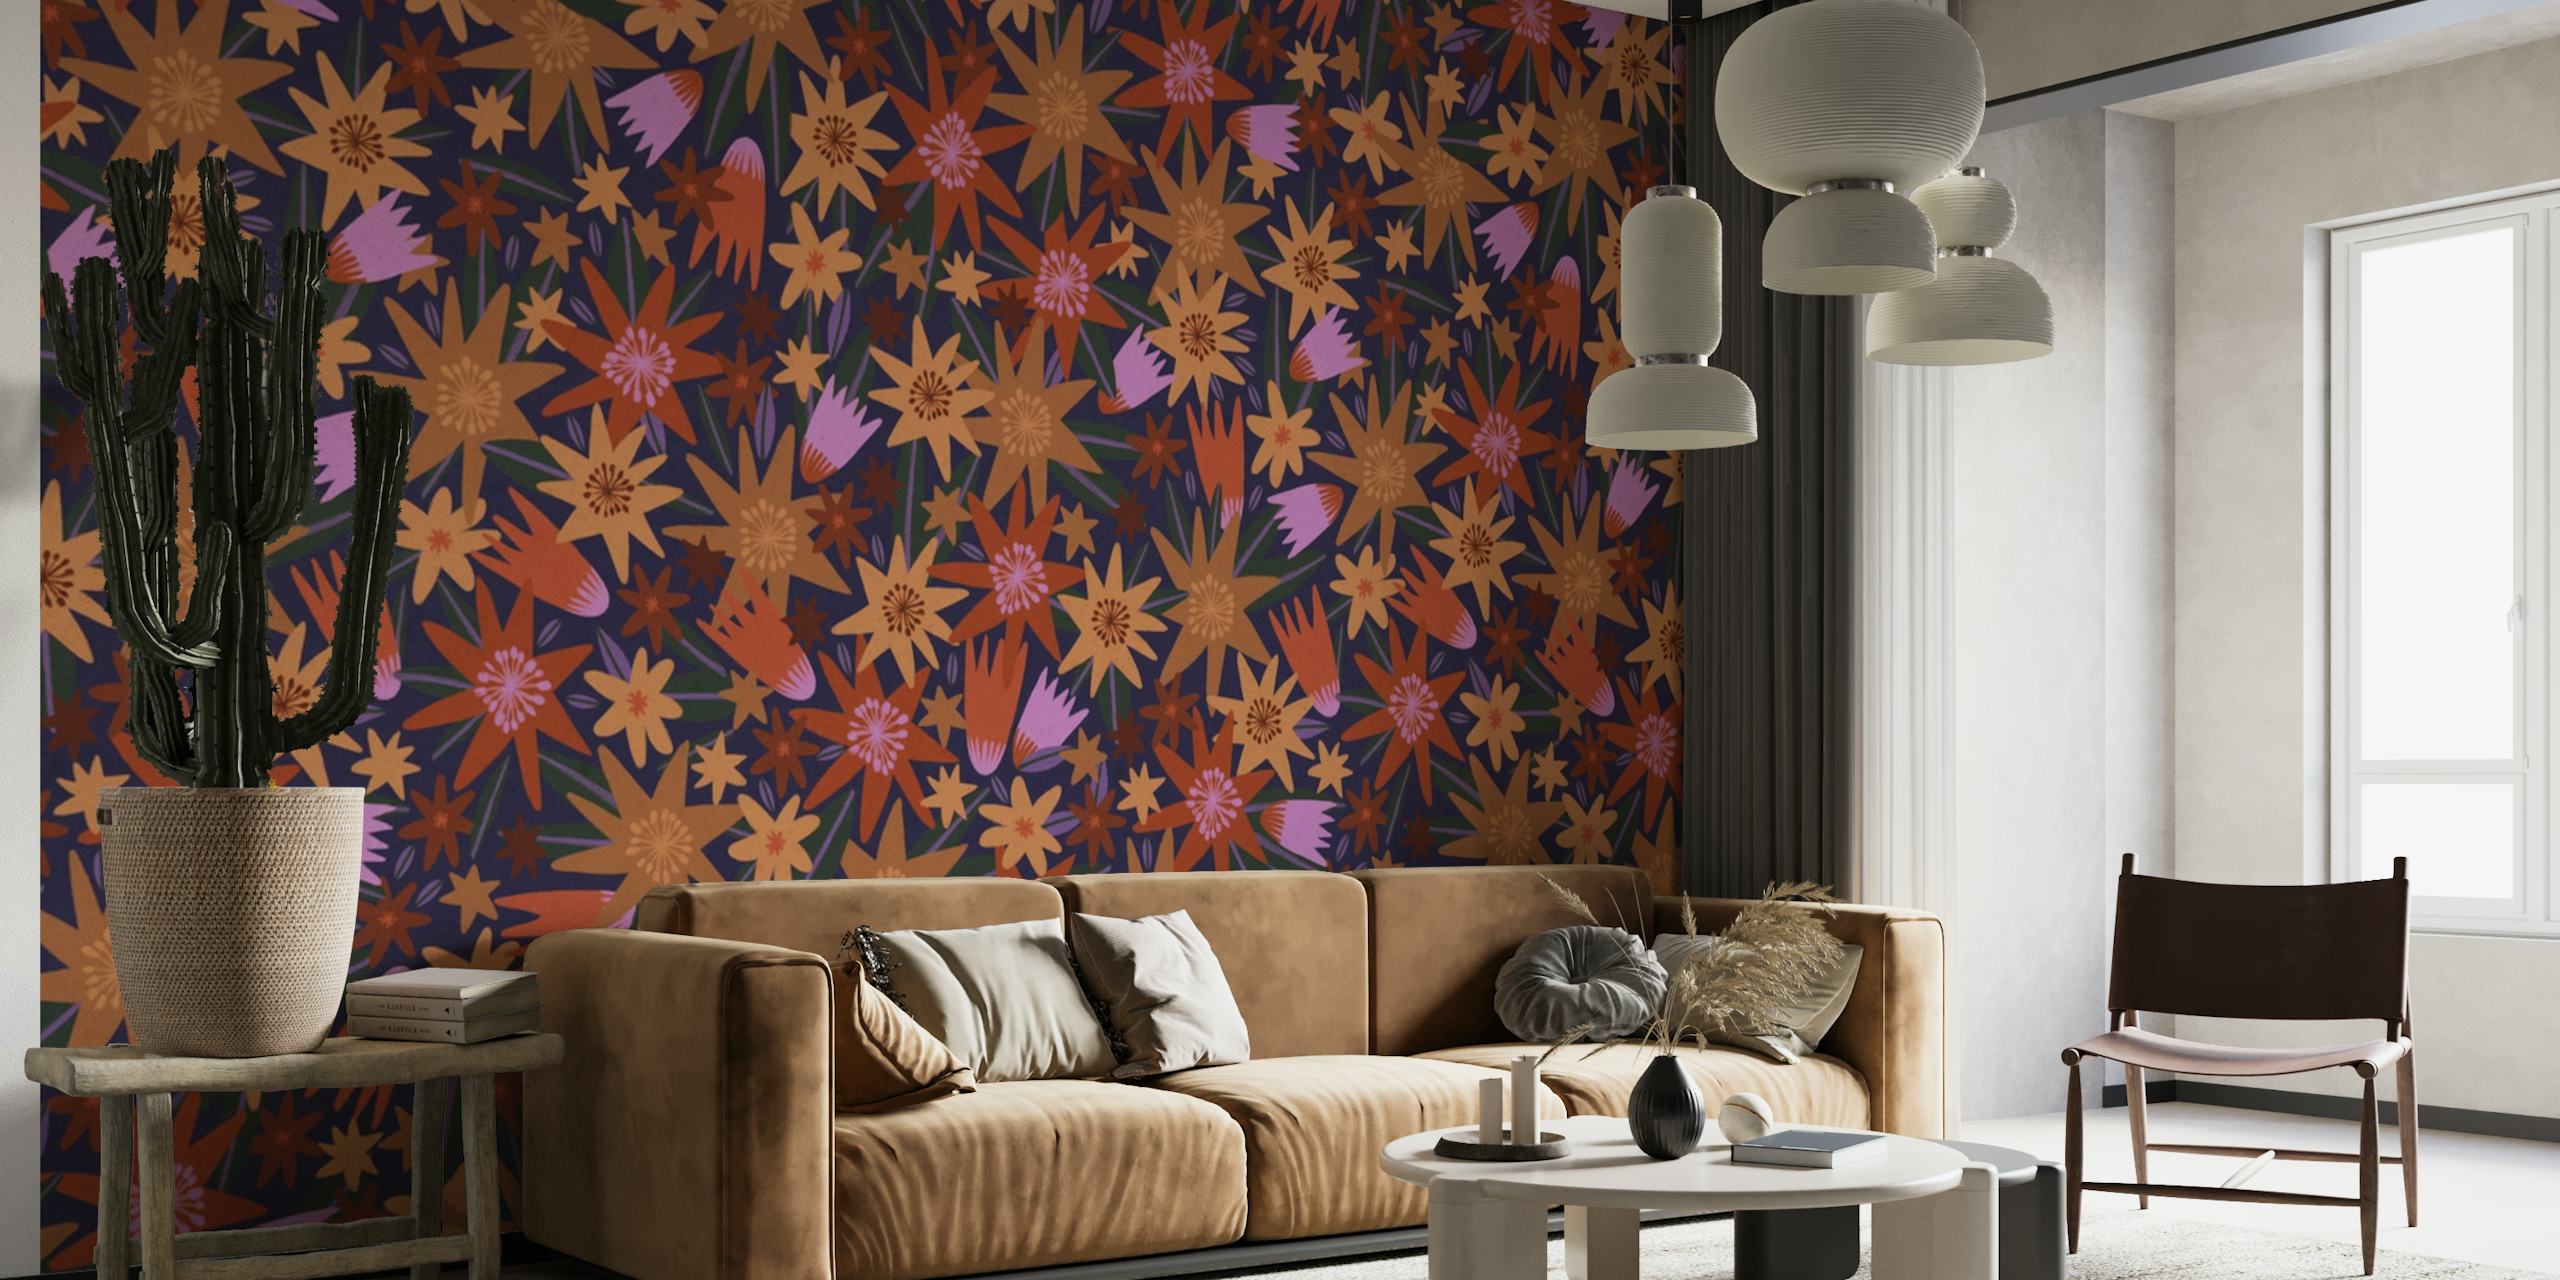 Purple floral wall mural with intricate flower patterns